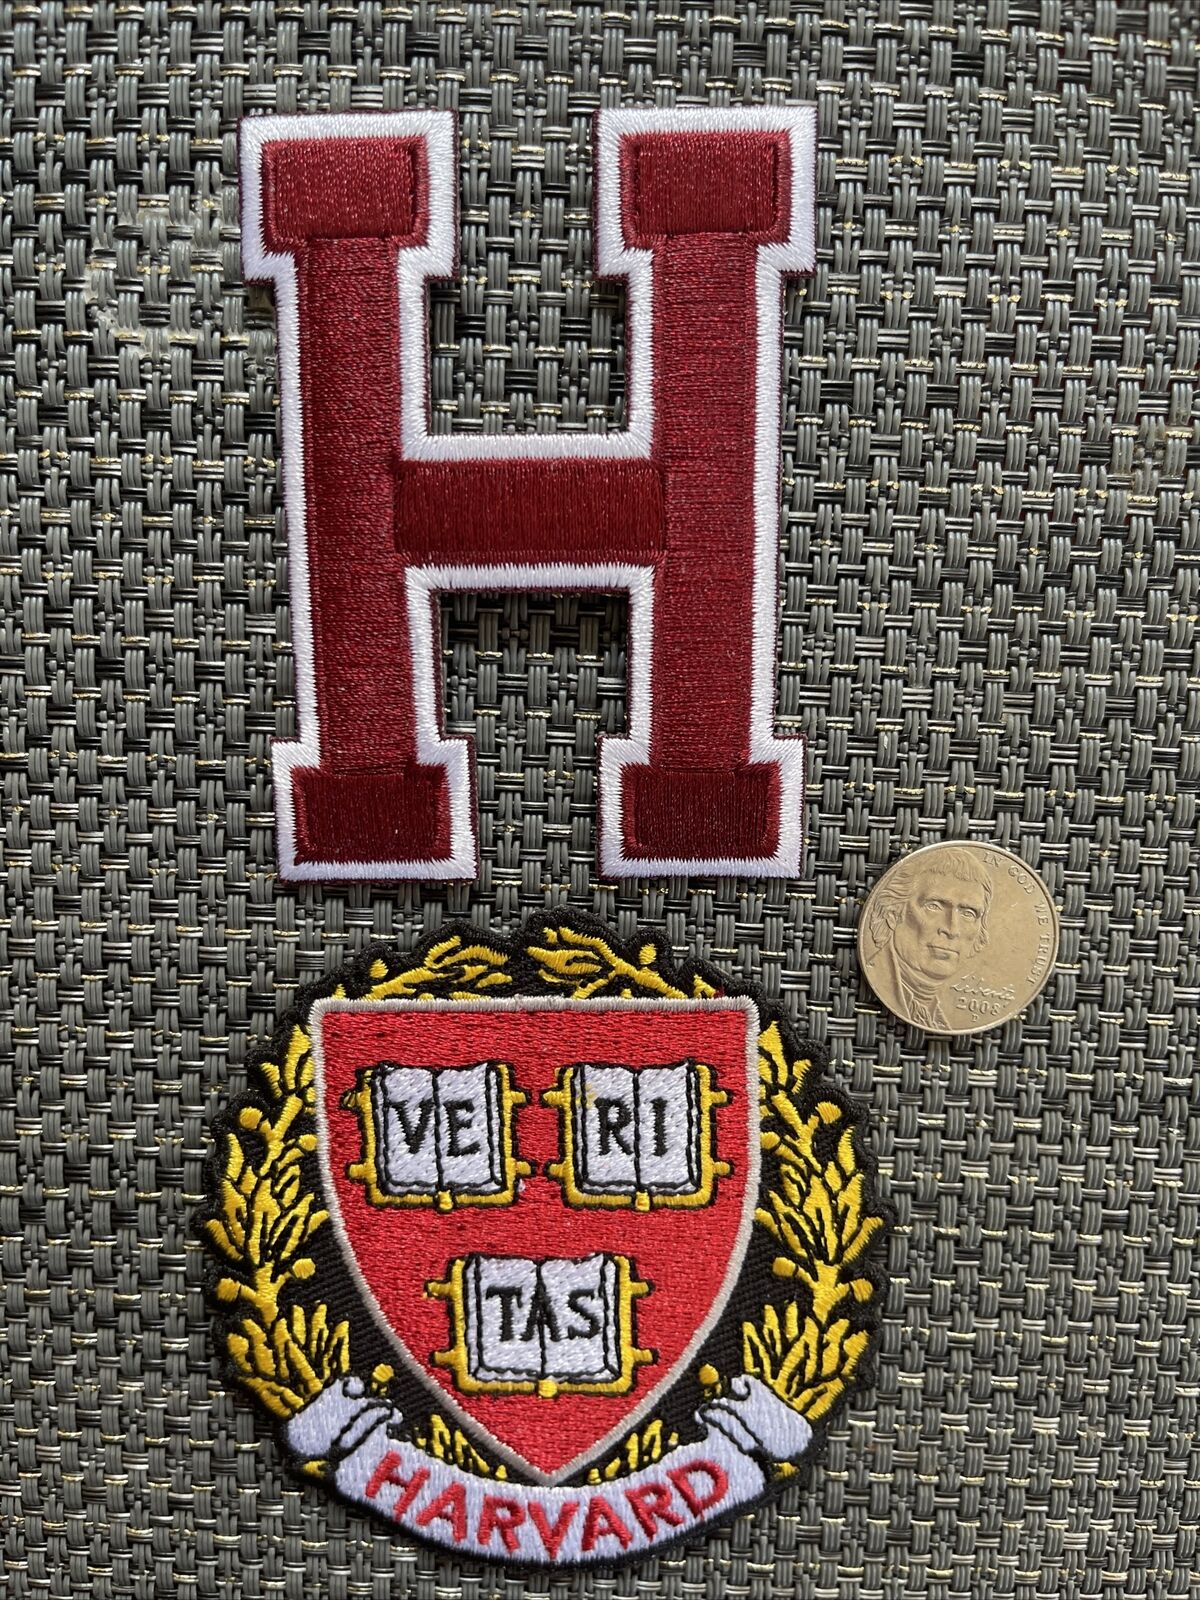 (2) Harvard University Vintage Embroidered Iron On Patches Patch Lot 3” & 3 X 2”